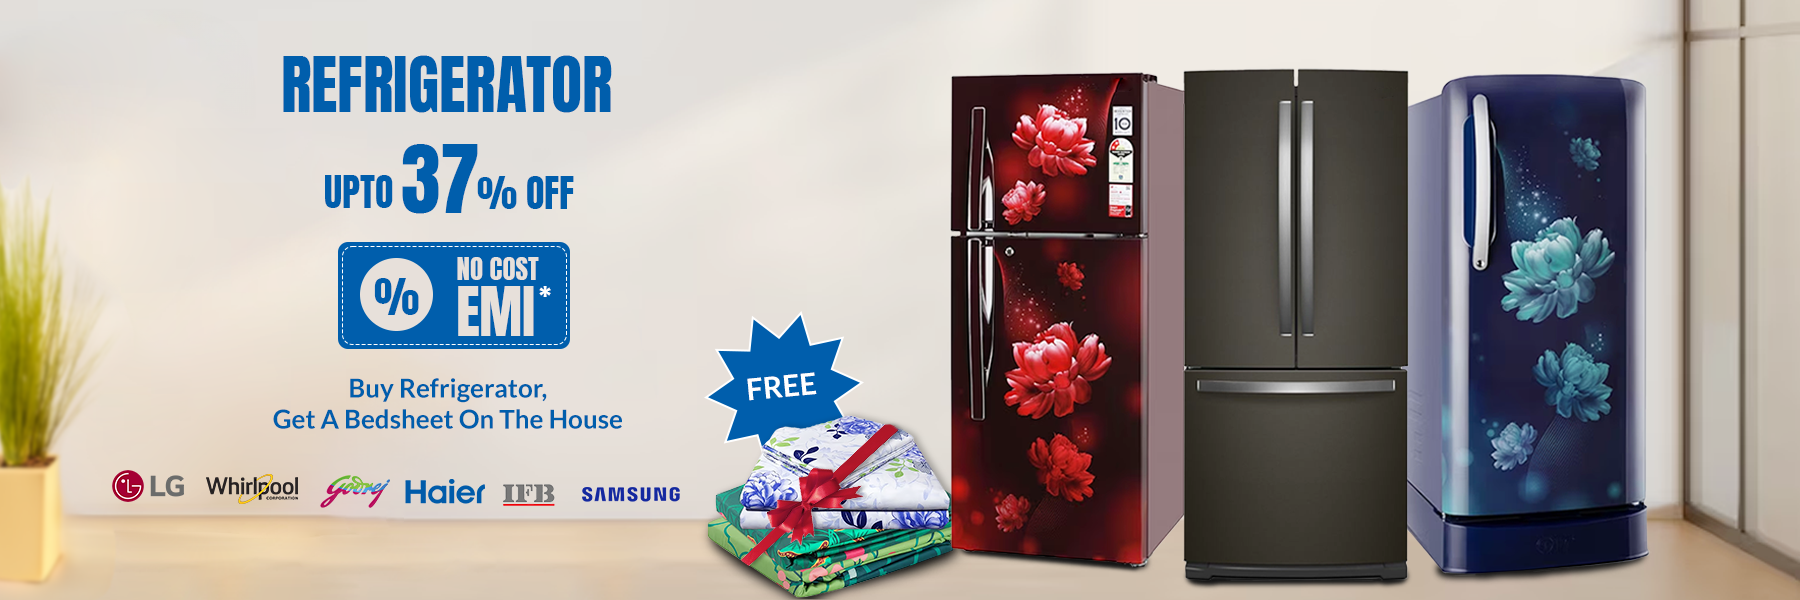  Purchase Refrigerator and Receive Complimentary Bedsheet – Limited Time Offer